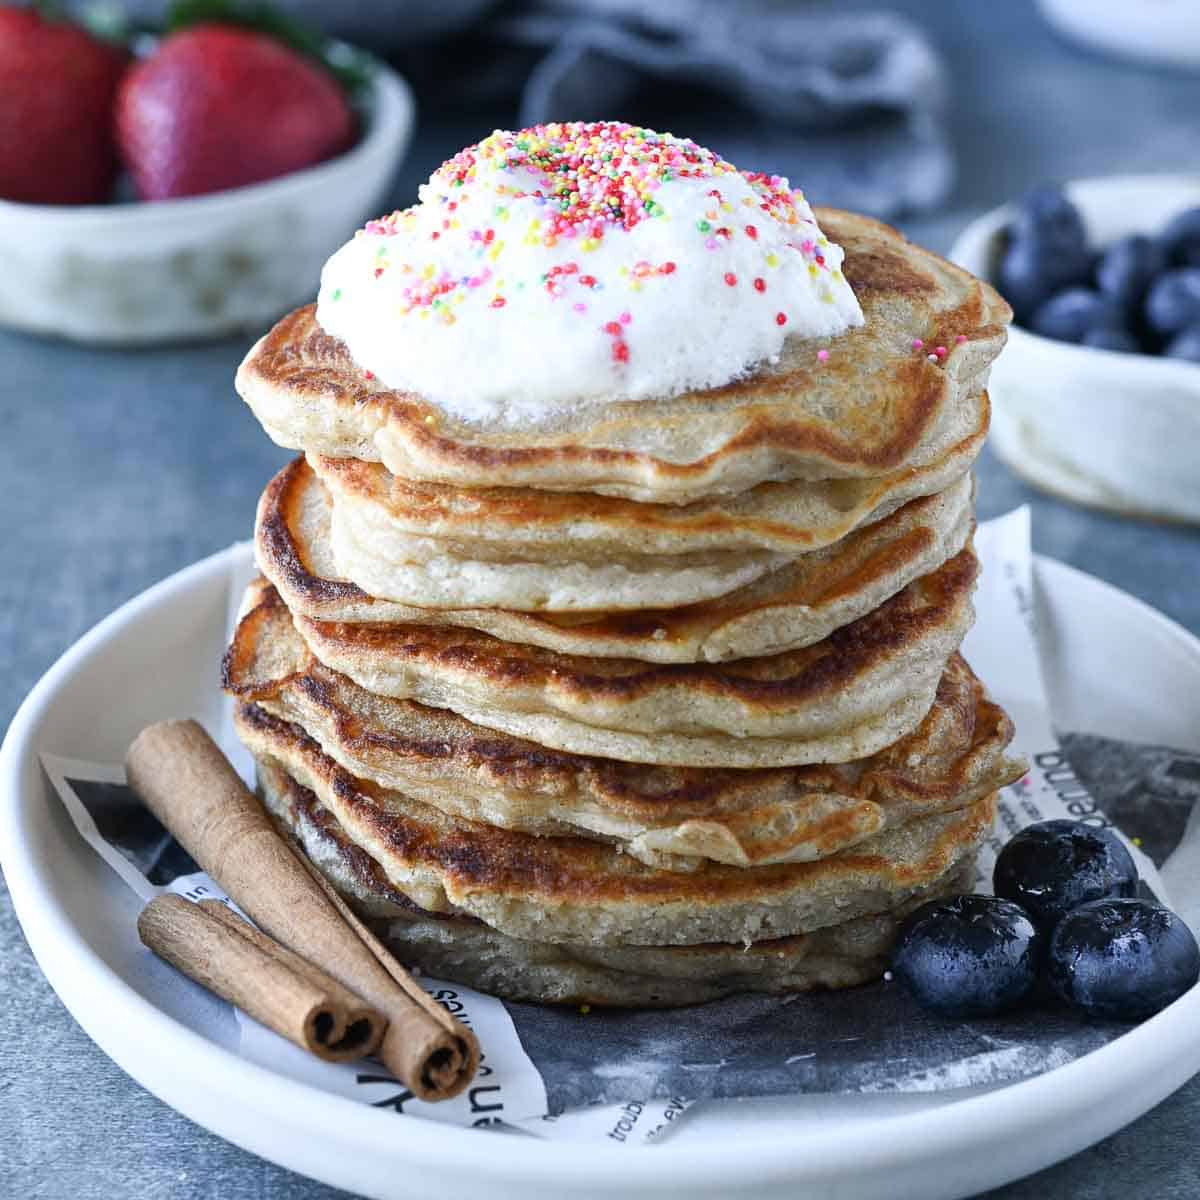 Pancakes stacked on a white plate with whipped cream, cinnamon and blueberries.